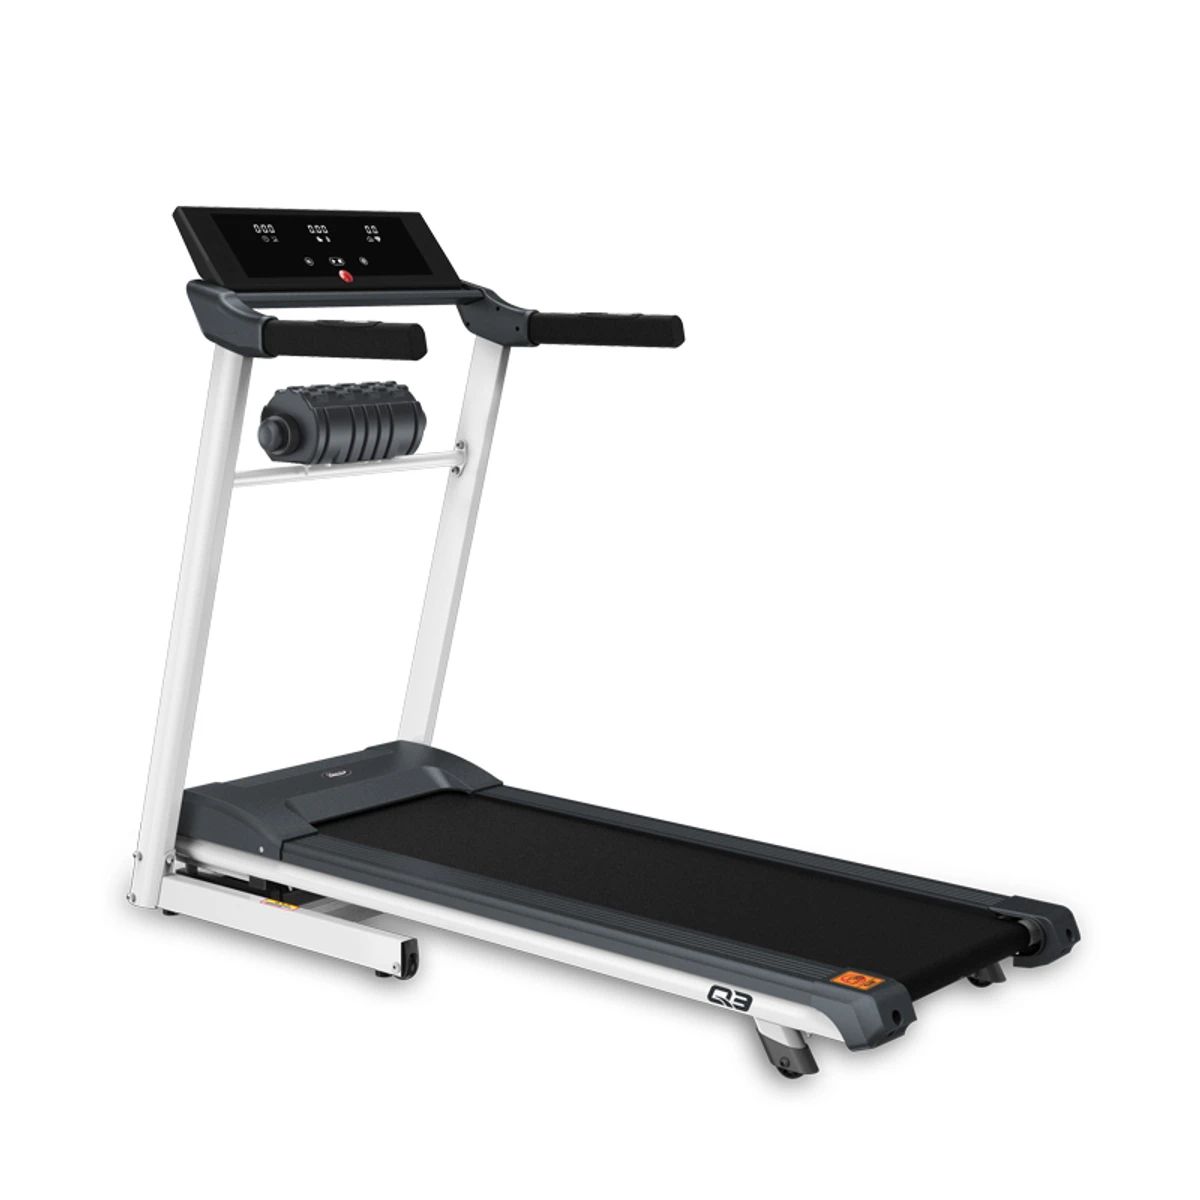 Daily youth Q3MS Multi-function Foldable Motorized Treadmill